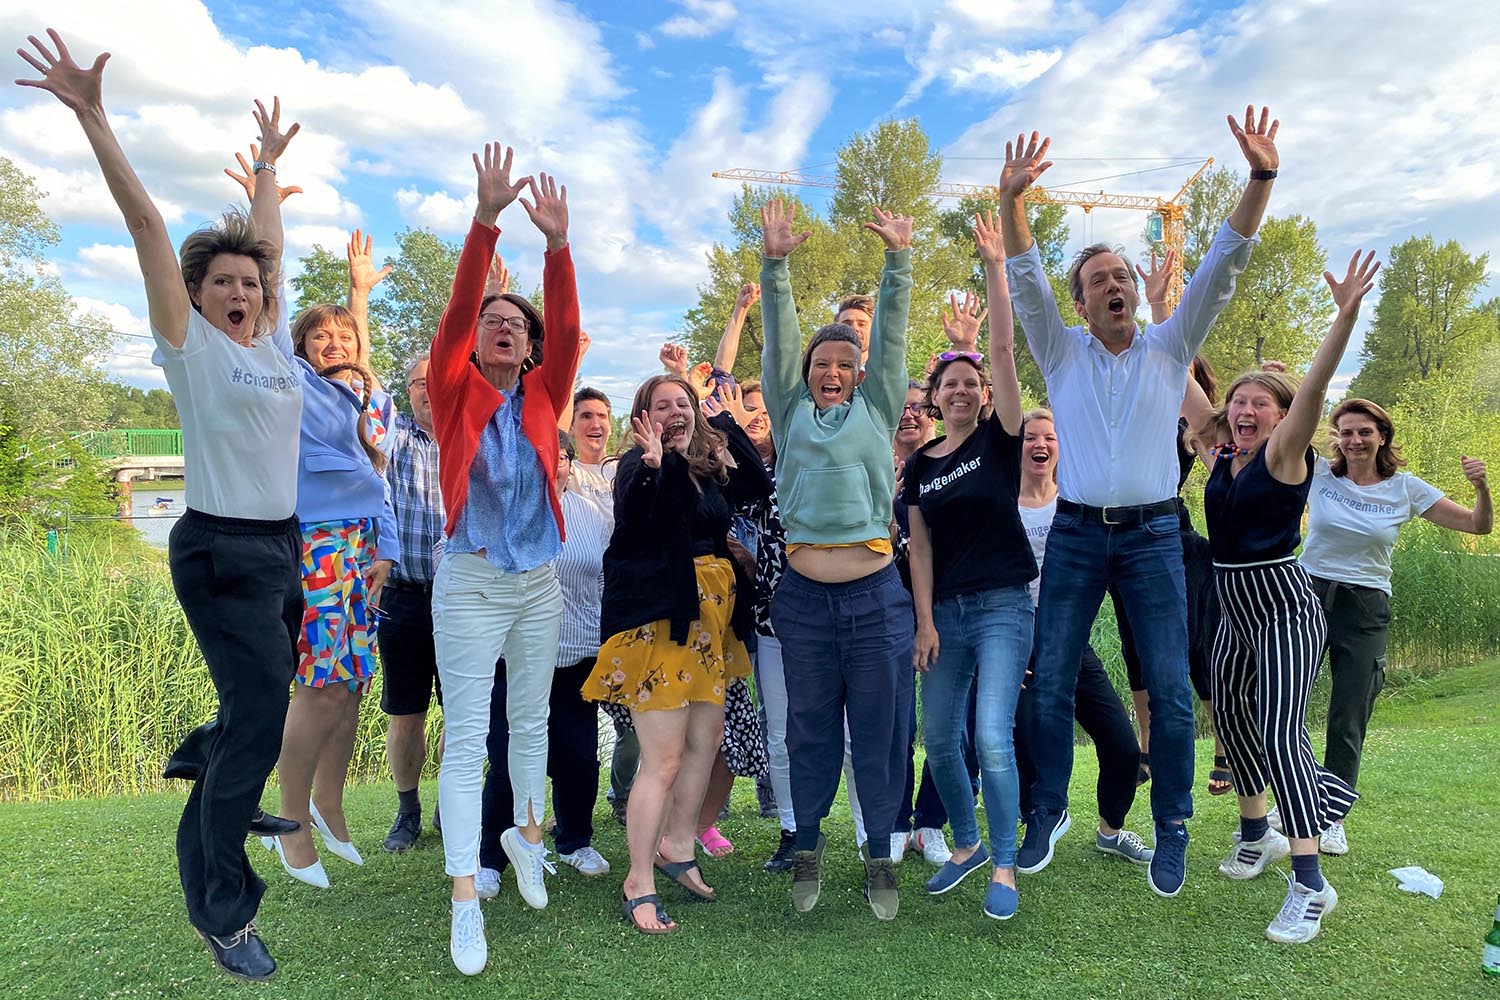 Group picture of the last module of the Ashoka Visionary Program in Central and Eastern Europe. Participants and organisers on a meadow, jumping up with stretched arms.